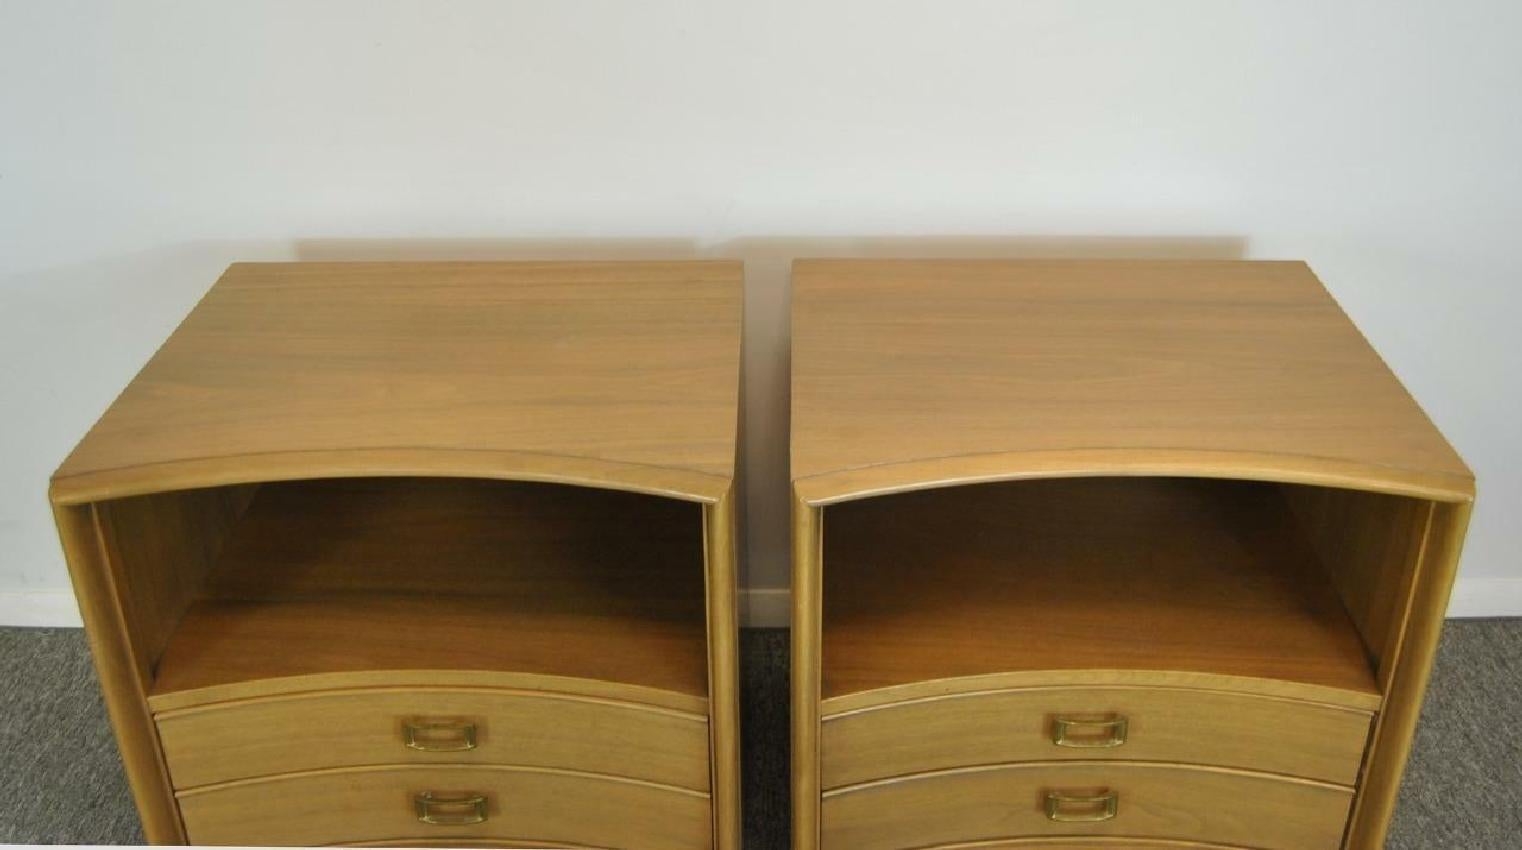 Classic clean midcentury design on this pair of nightstands designed by Paul Frankl for the Johnson Furniture Co of Grand Rapids, Michigan. Features include curved fronts, a magazine shelf and two dovetailed drawers with brass hardware. Stands are